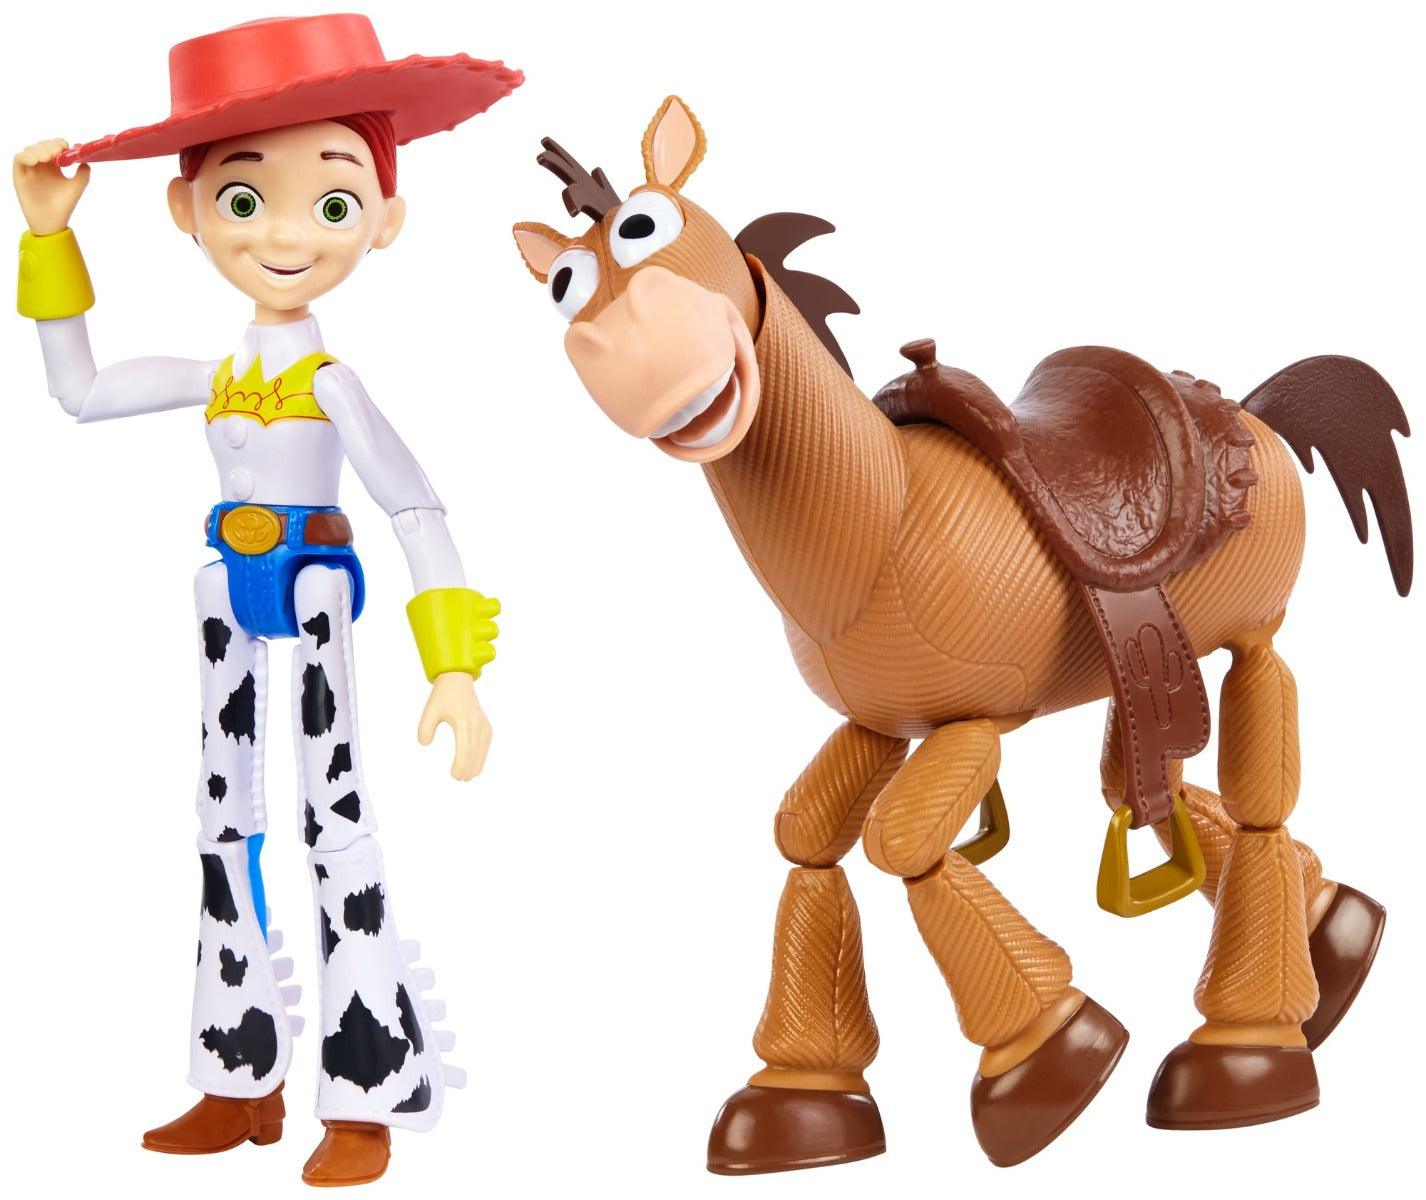 Toy Story Adventure Character Figures - Jessie & Bullseye (Pack Of 2)